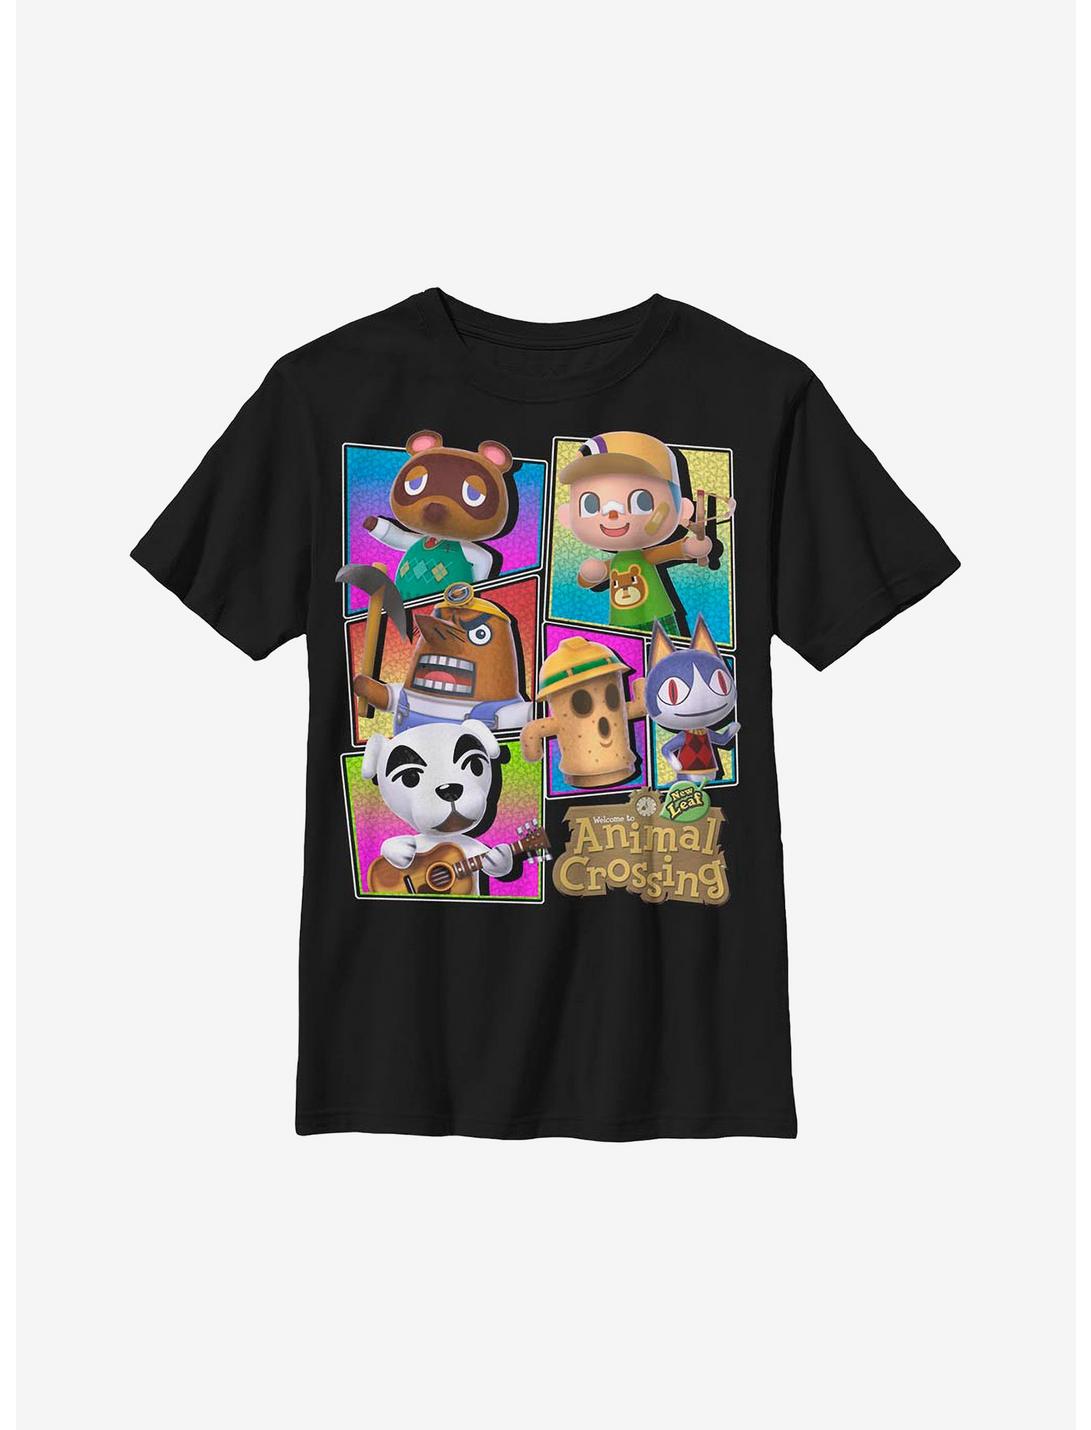 Animal Crossing Neon Characters Youth T-Shirt, BLACK, hi-res